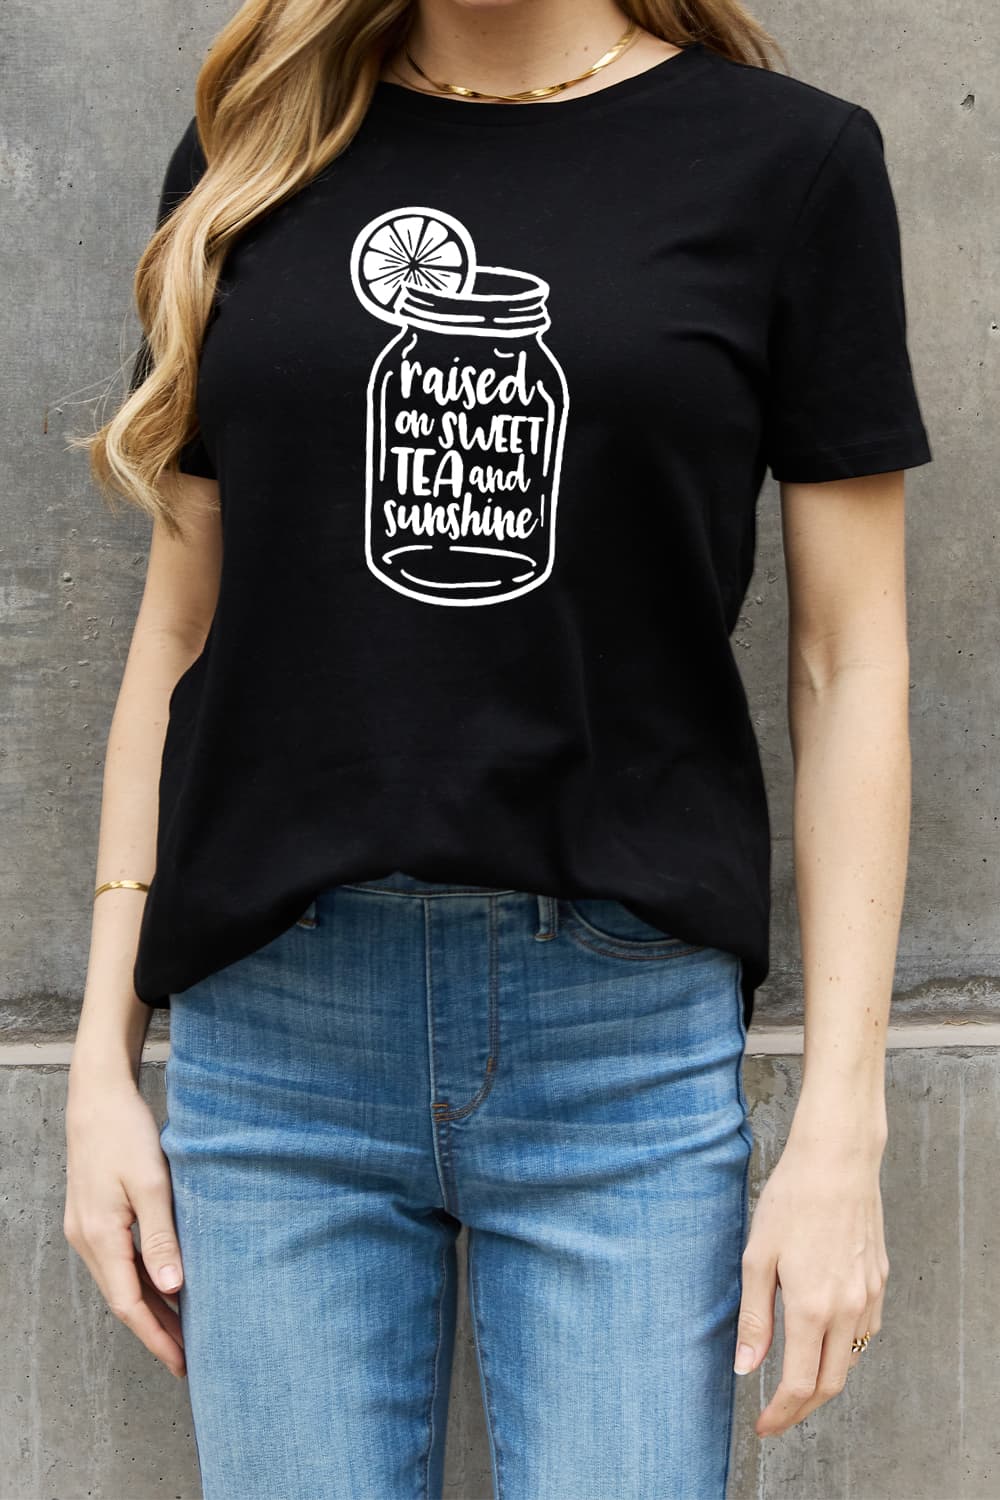 Simply Love Full Size RAISED ON SWEET TEA AND  SUNSHINE Graphic Cotton Tee